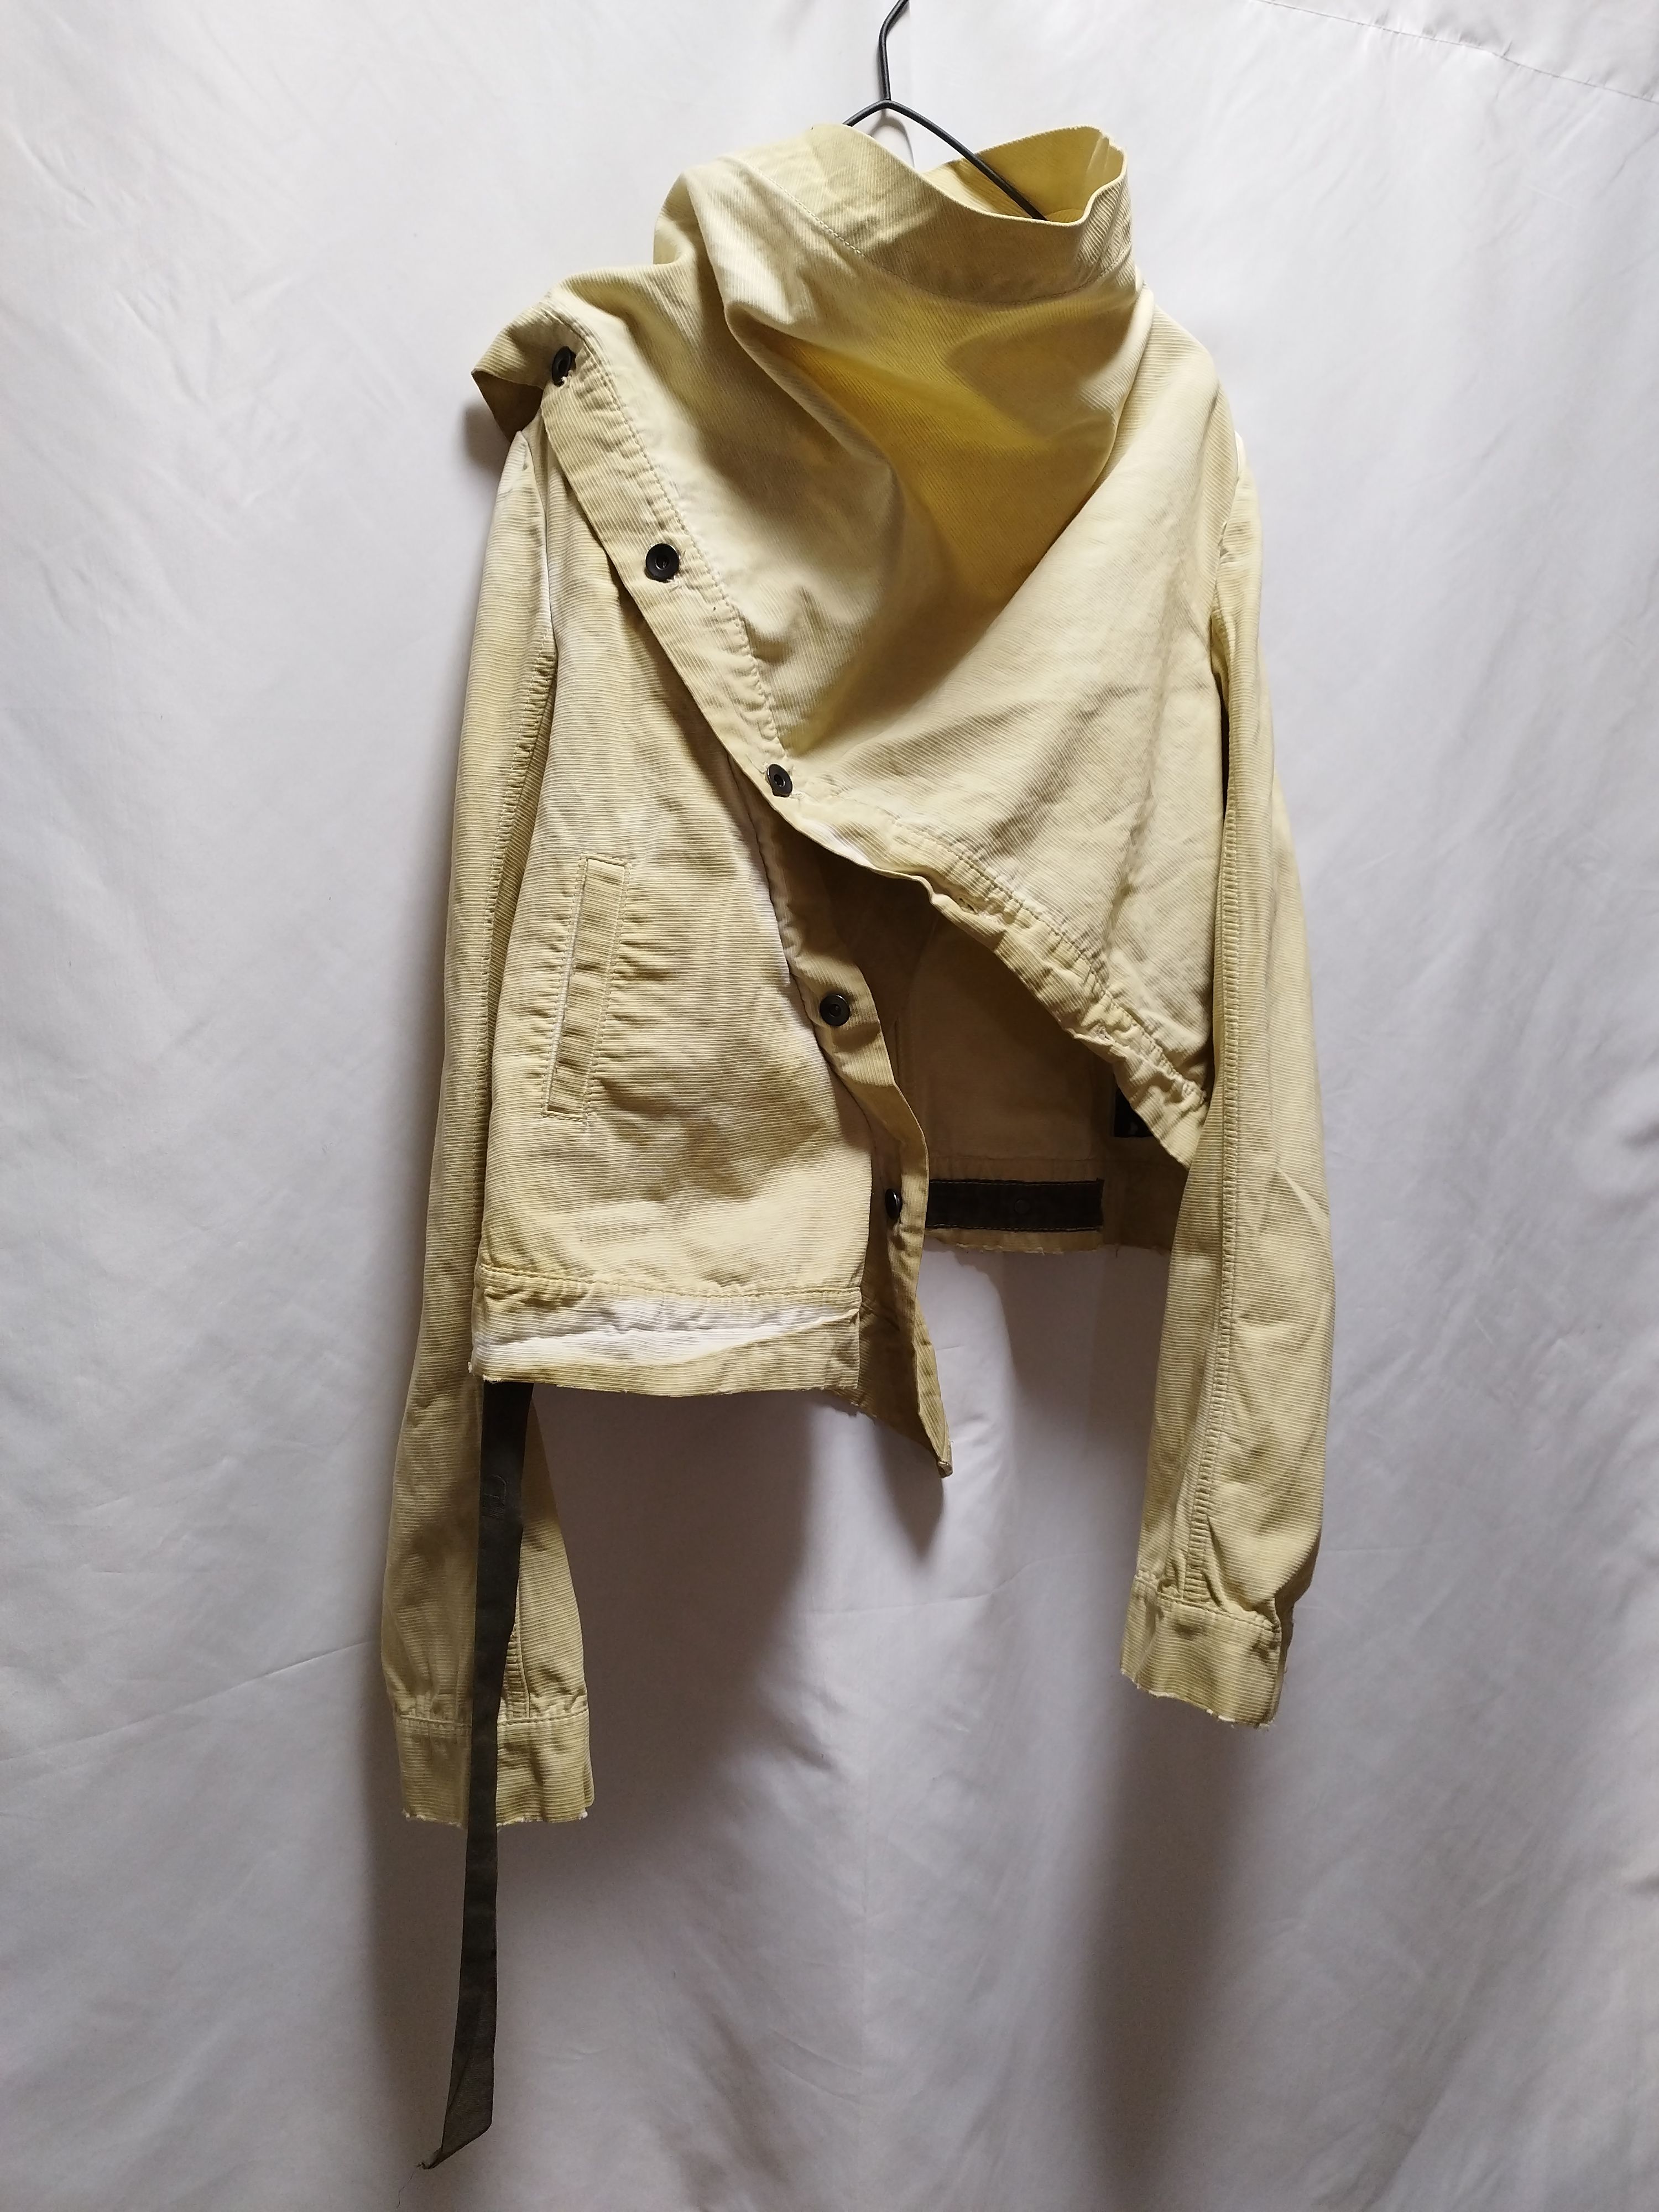 Pre-owned Rick Owens X Rick Owens Drkshdw Very Archive Dusty Dyed Tracker Jacket Draped Denim In Cream